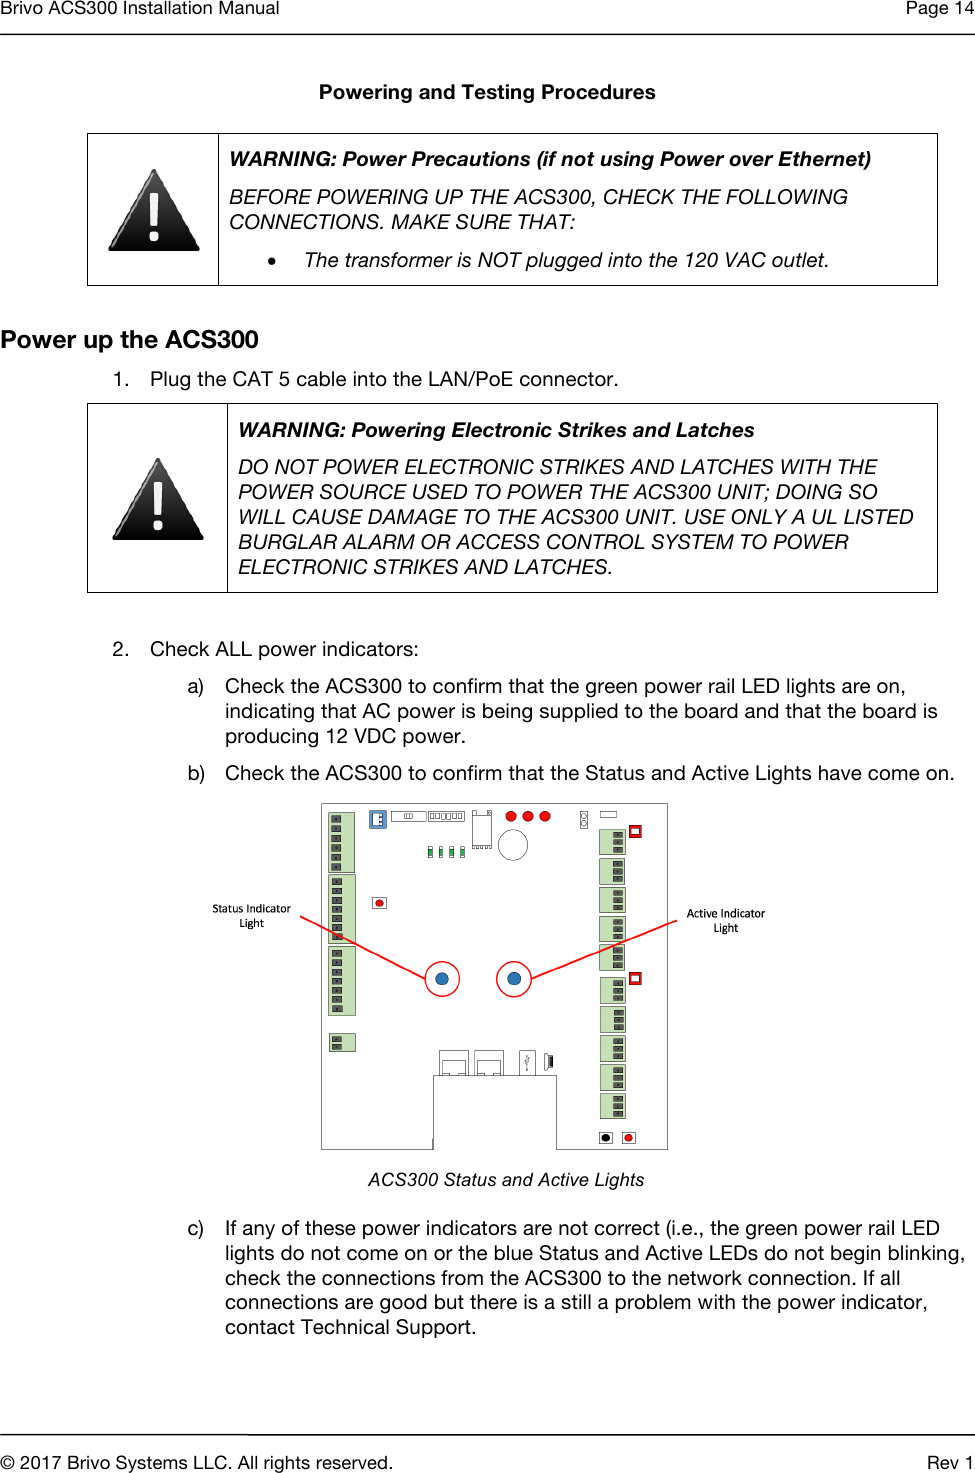 Brivo ACS300 Installation Manual Page 14     © 2017 Brivo Systems LLC. All rights reserved. Rev 1  Powering and Testing Procedures  WARNING: Power Precautions (if not using Power over Ethernet) BEFORE POWERING UP THE ACS300, CHECK THE FOLLOWING CONNECTIONS. MAKE SURE THAT: • The transformer is NOT plugged into the 120 VAC outlet.  Power up the ACS300 1. Plug the CAT 5 cable into the LAN/PoE connector.  WARNING: Powering Electronic Strikes and Latches DO NOT POWER ELECTRONIC STRIKES AND LATCHES WITH THE POWER SOURCE USED TO POWER THE ACS300 UNIT; DOING SO WILL CAUSE DAMAGE TO THE ACS300 UNIT. USE ONLY A UL LISTED BURGLAR ALARM OR ACCESS CONTROL SYSTEM TO POWER ELECTRONIC STRIKES AND LATCHES.  2. Check ALL power indicators: a) Check the ACS300 to confirm that the green power rail LED lights are on, indicating that AC power is being supplied to the board and that the board is producing 12 VDC power. b) Check the ACS300 to confirm that the Status and Active Lights have come on.     ACS300 Status and Active Lights c) If any of these power indicators are not correct (i.e., the green power rail LED lights do not come on or the blue Status and Active LEDs do not begin blinking, check the connections from the ACS300 to the network connection. If all connections are good but there is a still a problem with the power indicator, contact Technical Support.  